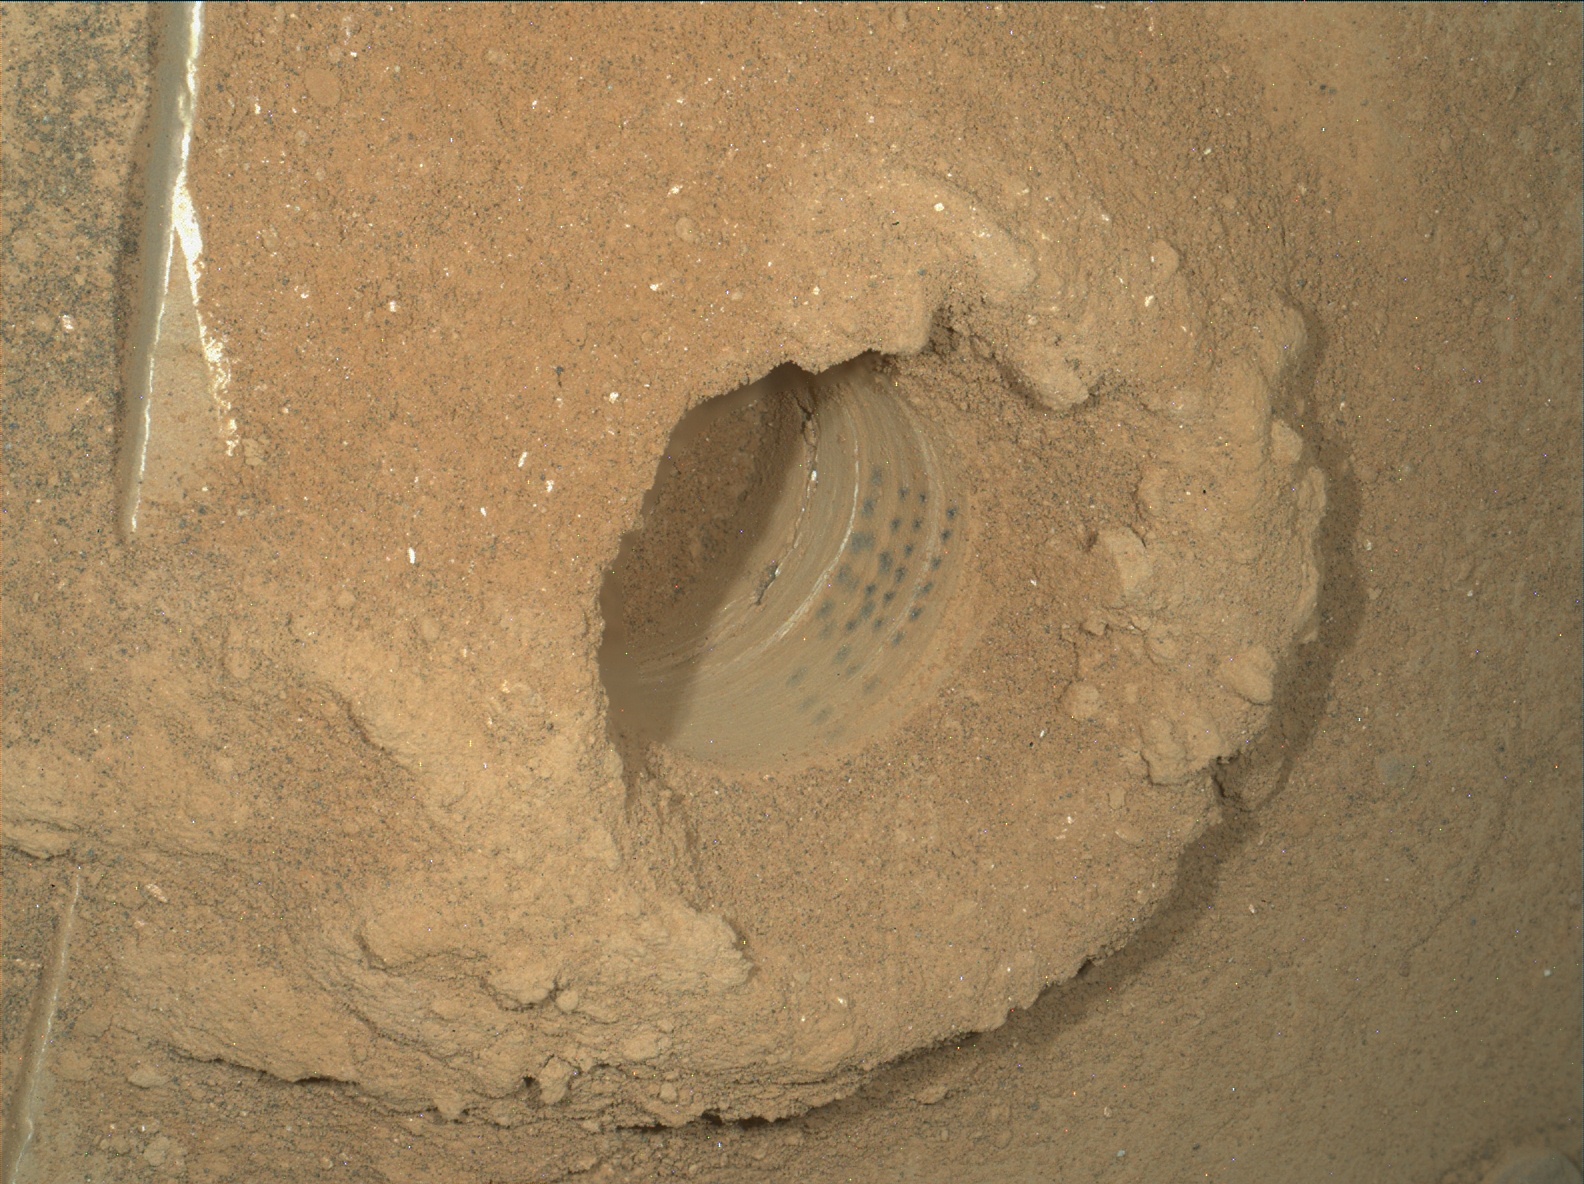 Nasa's Mars rover Curiosity acquired this image using its Mars Hand Lens Imager (MAHLI) on Sol 2087